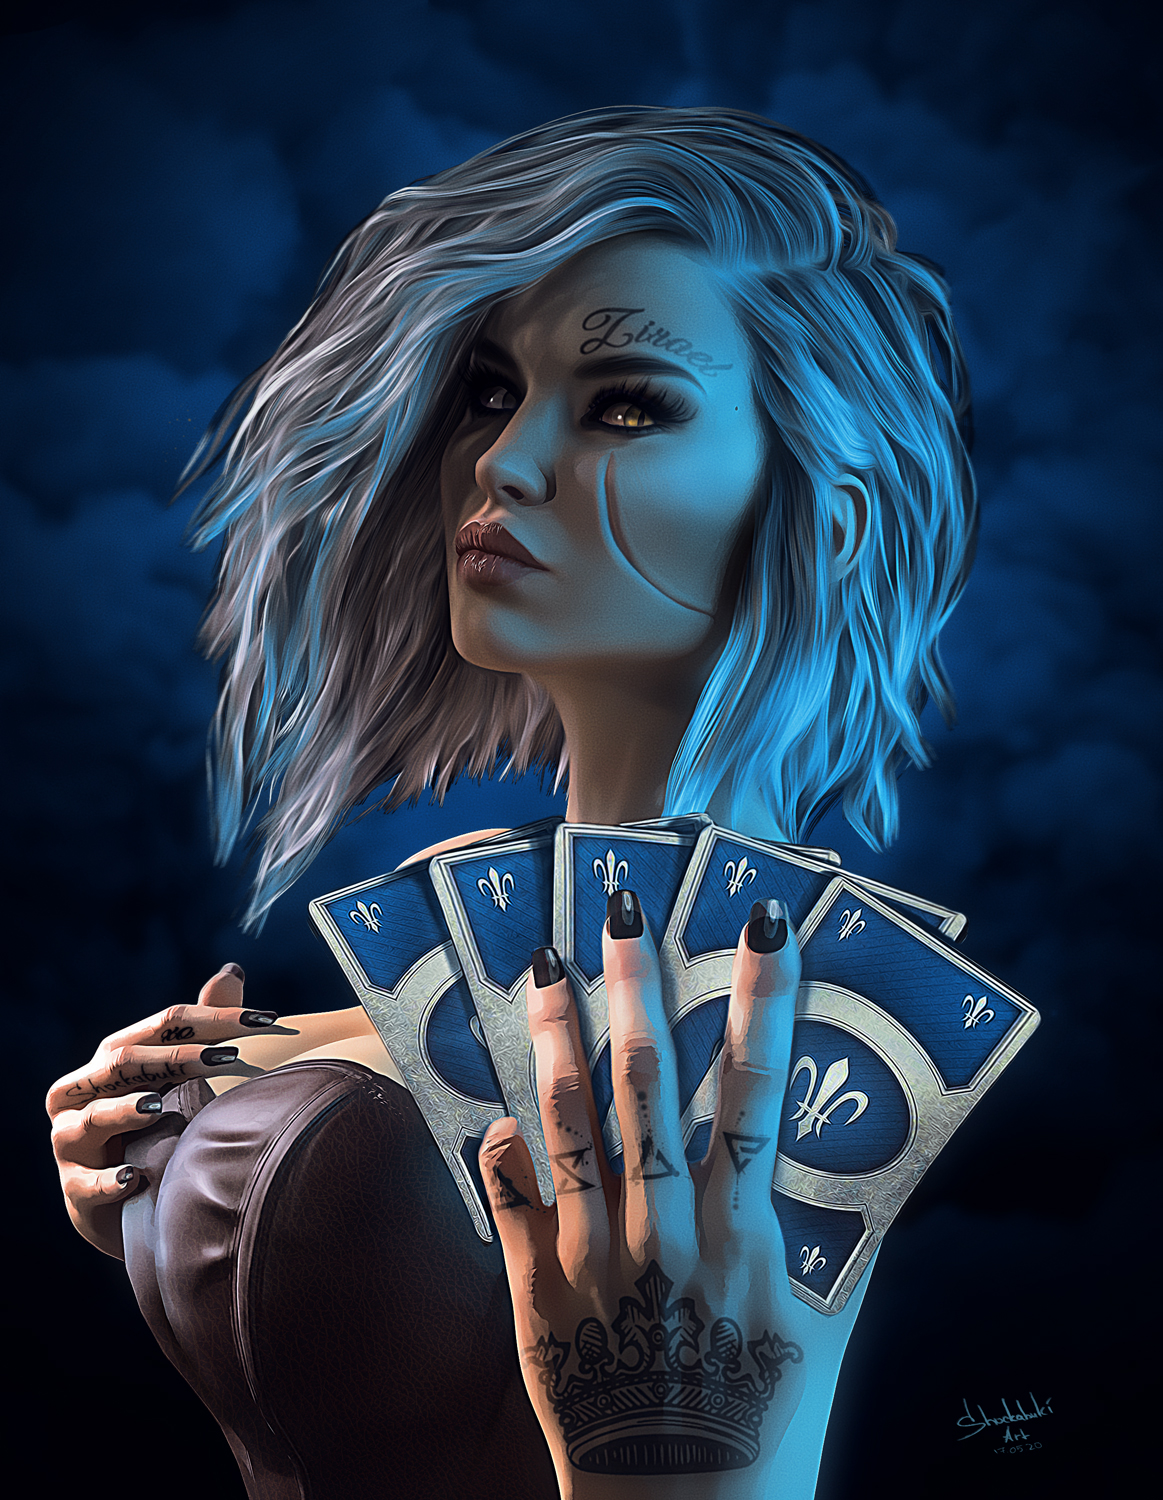 Ciri Cirilla The Witcher The Witcher 3 Wild Hunt Gwent Cards Blue Hair Games Posters Digital Art Sho 1163x1500